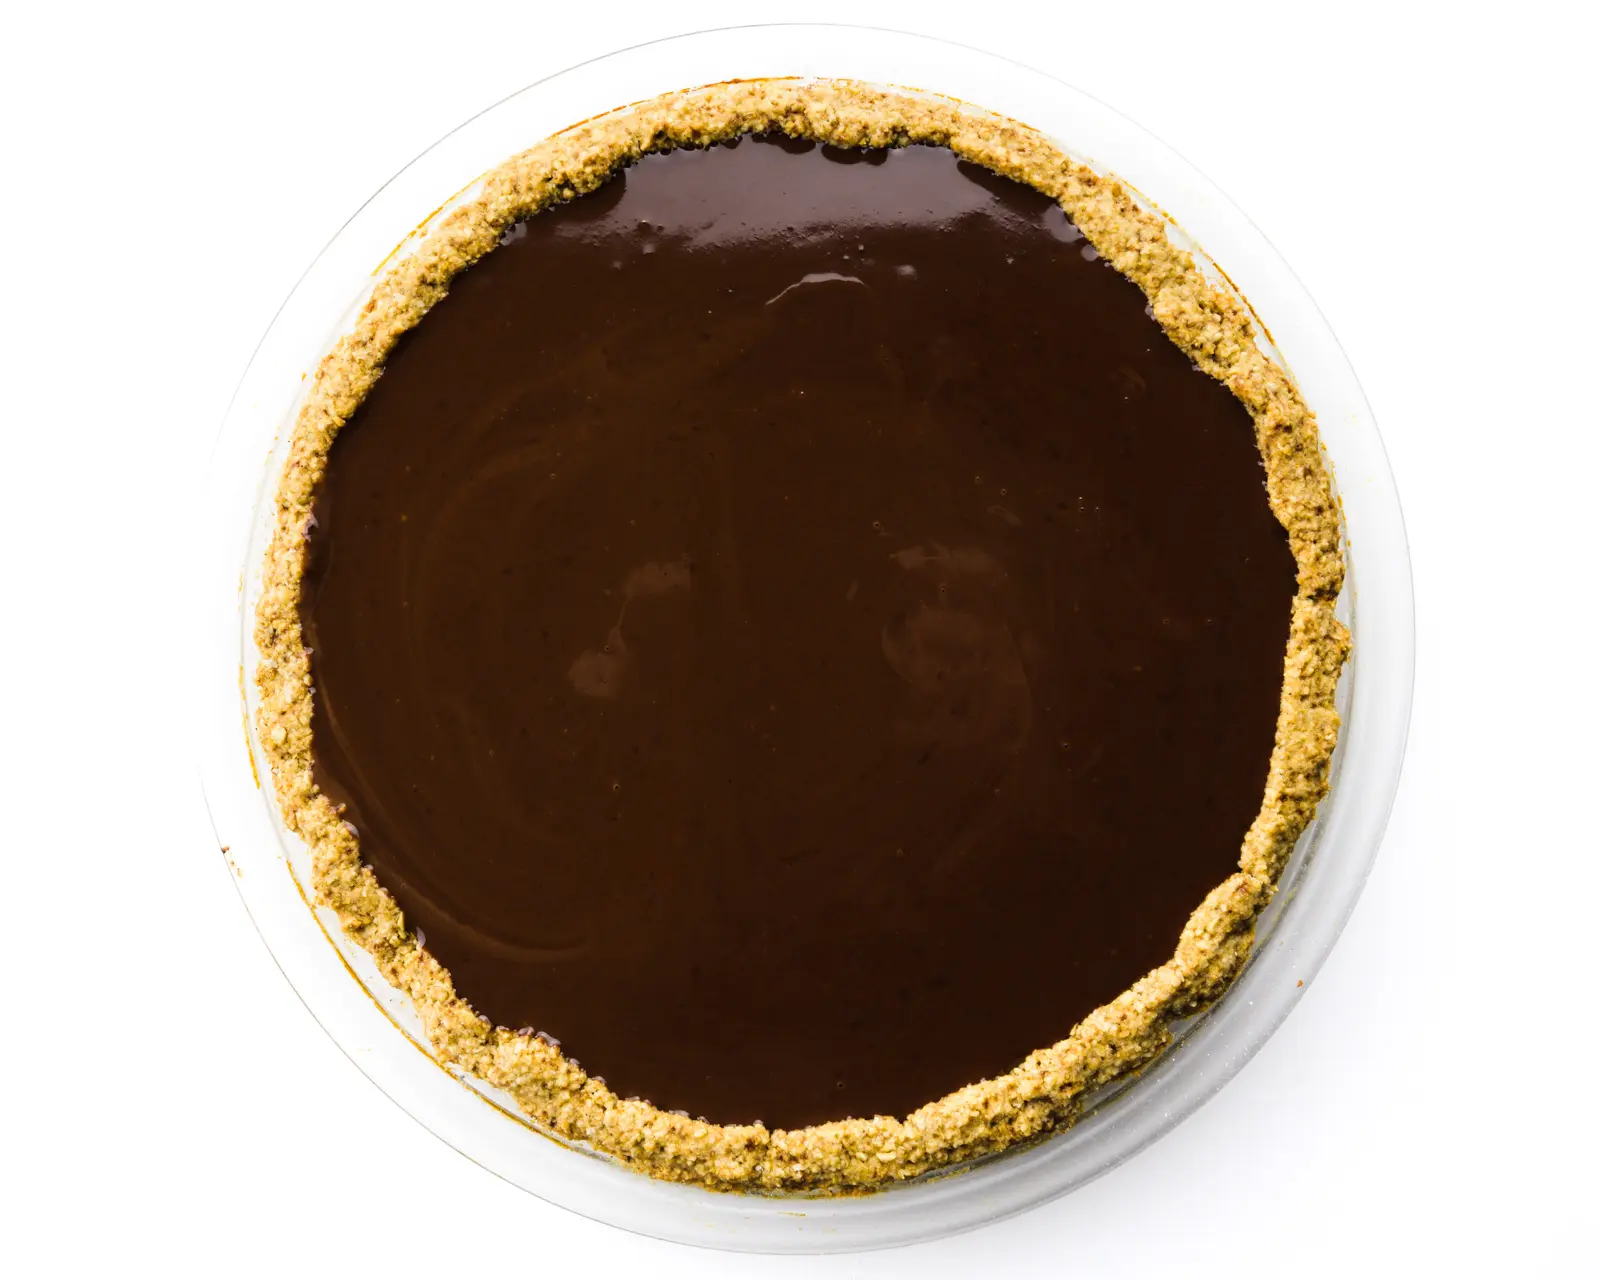 Looking down on a full chocolate pie sitting in an oatmeal pie crust.